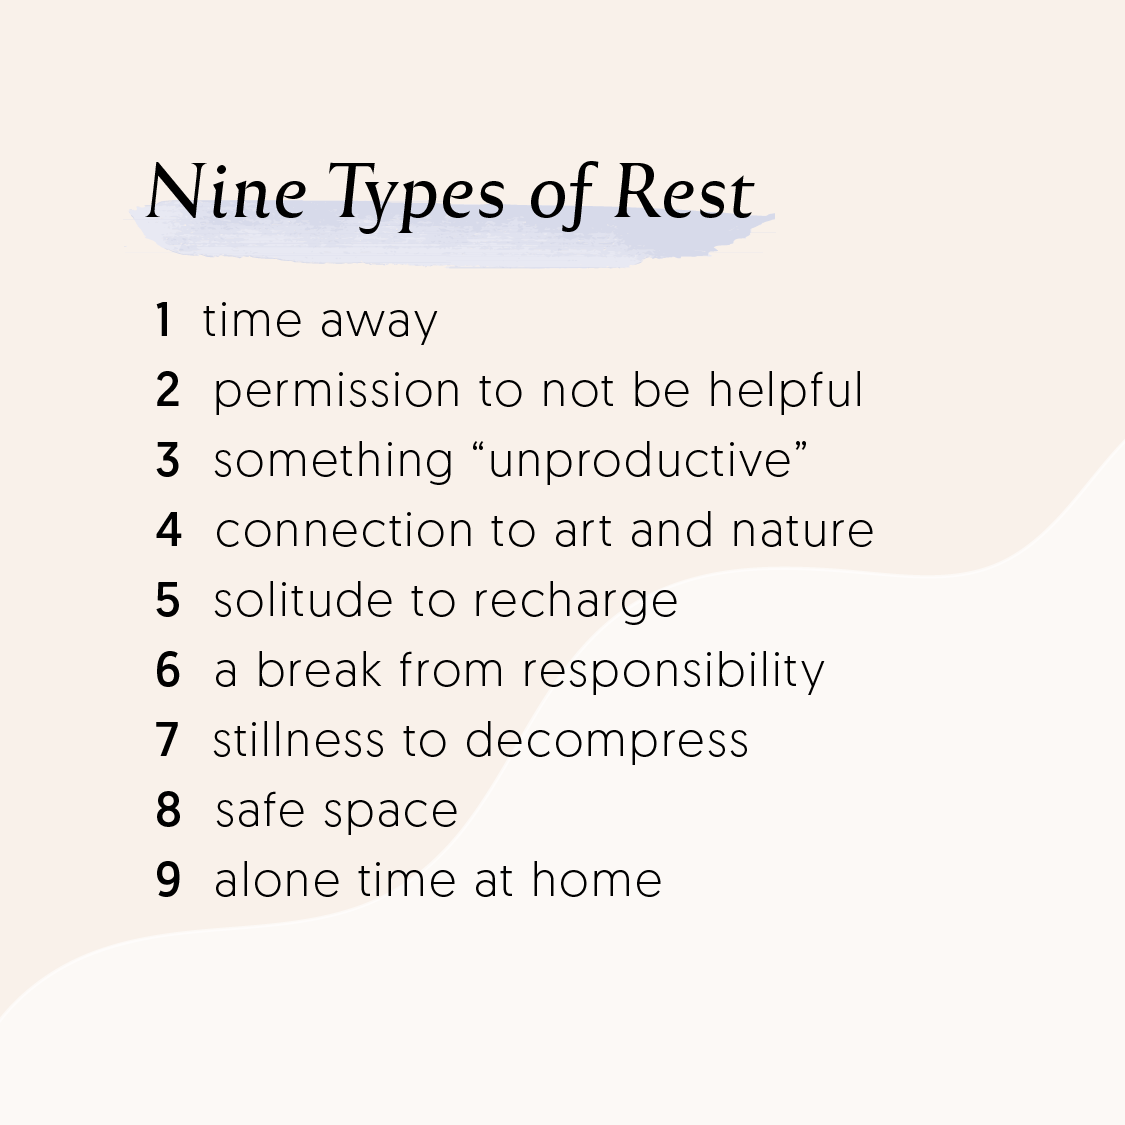 Nine types of rest: time away, permission to not be helpful, something "unproductive," connection to art and nature, solitude to recharge, a break from responsibility, stillness to decompress, safe space, and alone time at home.